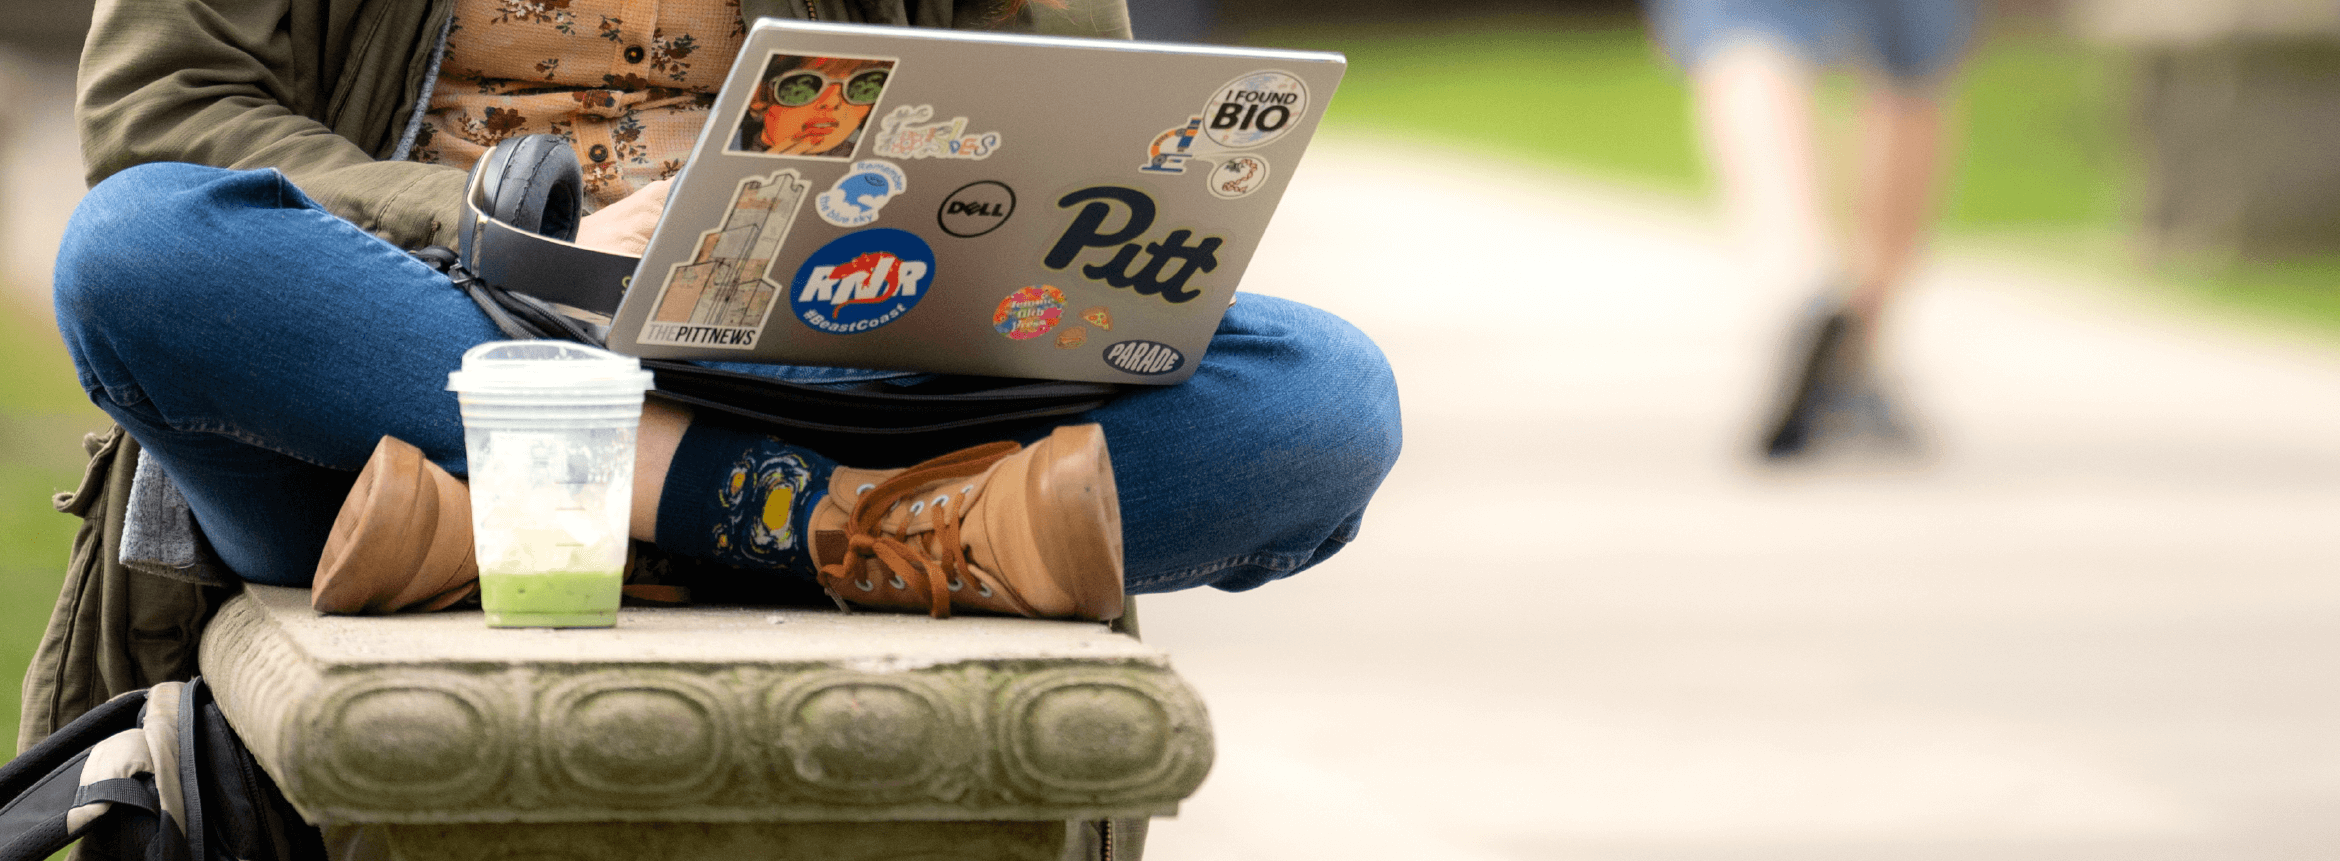 person sitting on a stone bench with a laptop in their lap